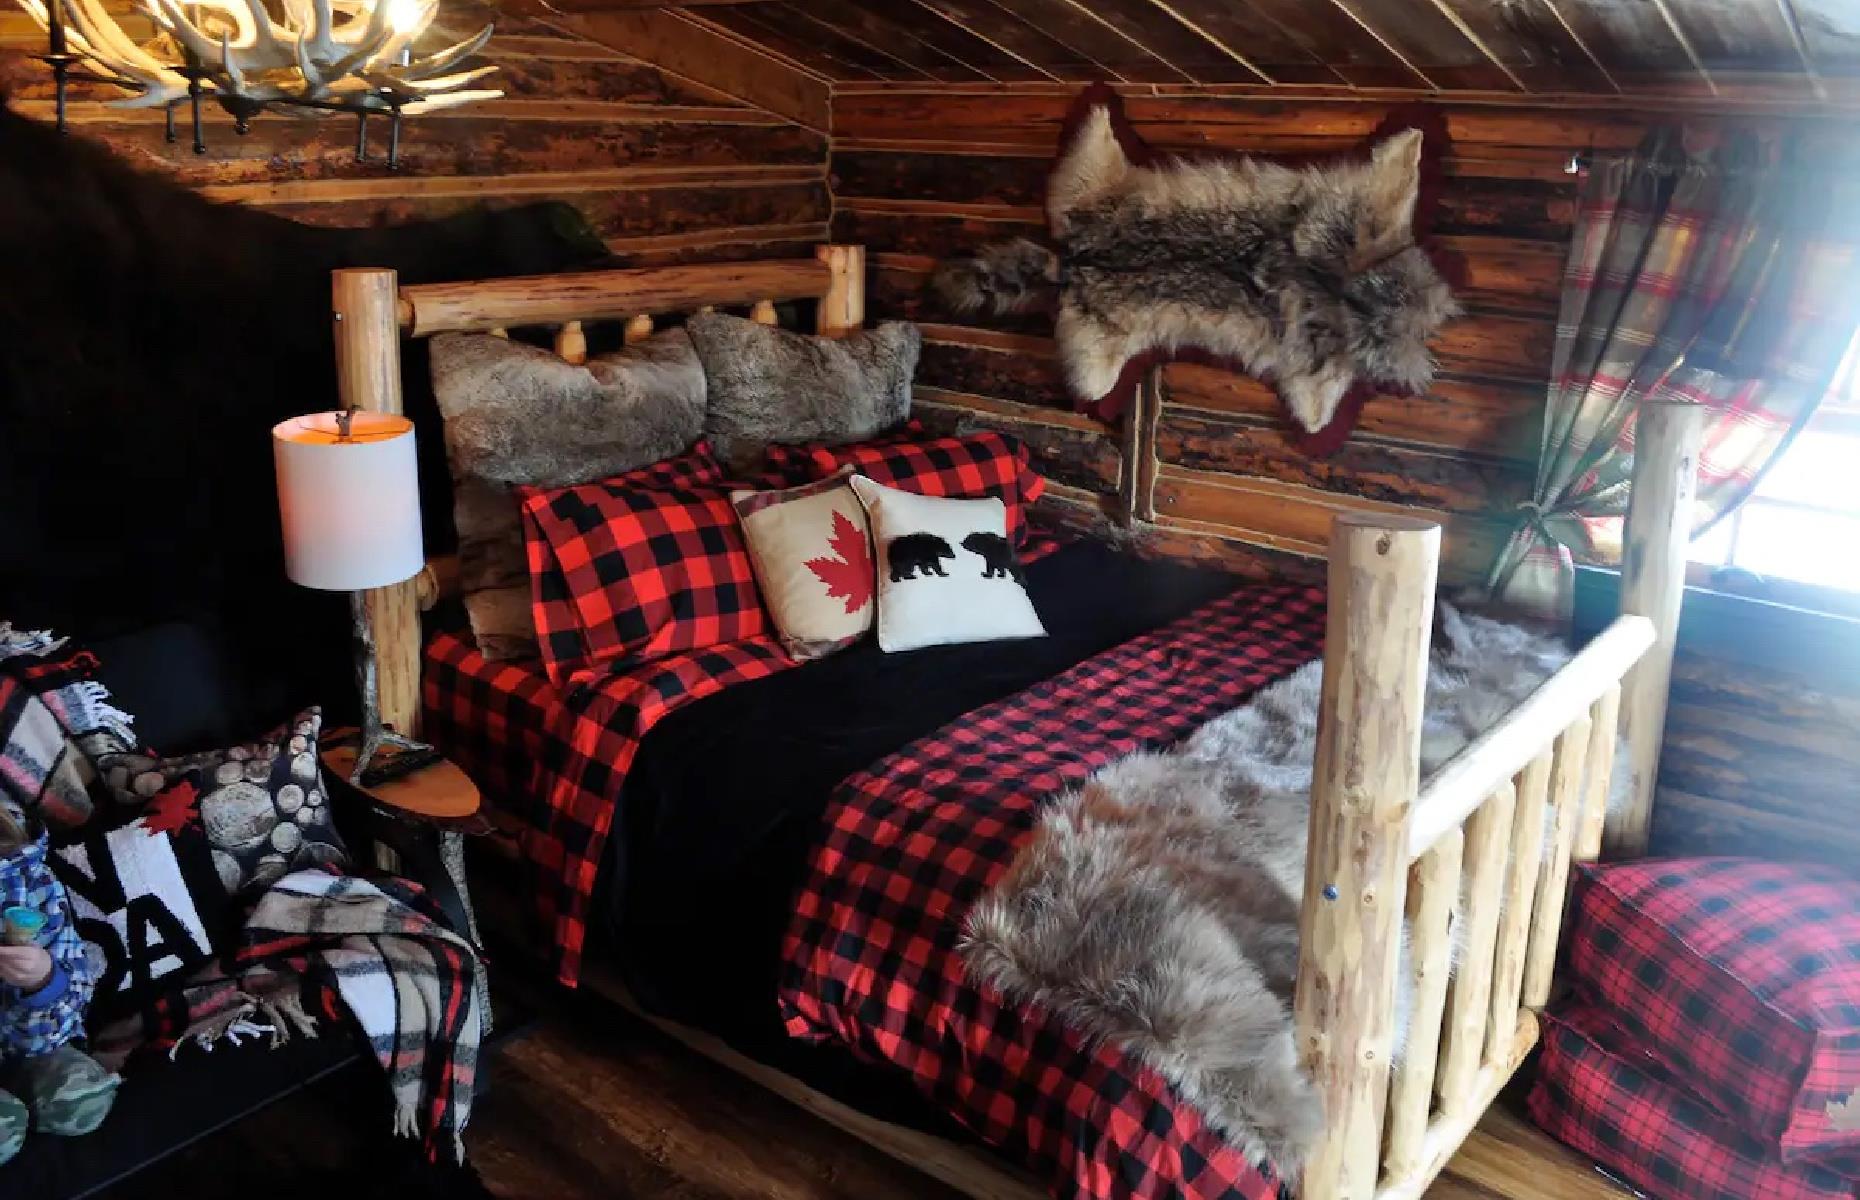 <p>Relax among foothills of the Rocky Mountains in this postcard-worthy log cabin near rugged Ghost Lake, Alberta. This <a href="https://www.airbnb.co.uk/rooms/33159588?adults=1&category_tag=Tag%3A5348&children=0&infants=0&check_in=2022-10-19&check_out=2022-10-26&federated_search_id=ebcde463-87b0-4421-9477-ab875a95438e&source_impression_id=p3_1662855390_gaa9w9svQ9tUsrAJ">historic hut</a> was used as a fur trading post over 100 years ago and it still retains that frontier charm, with animal fur decor, a wood-burning stove and buffalo check bedding. You won’t be living like a pioneer, though – there is a bathroom in the cabin along with enough space for four guests to chill with each other after a hike or a winter skate on the lake.</p>